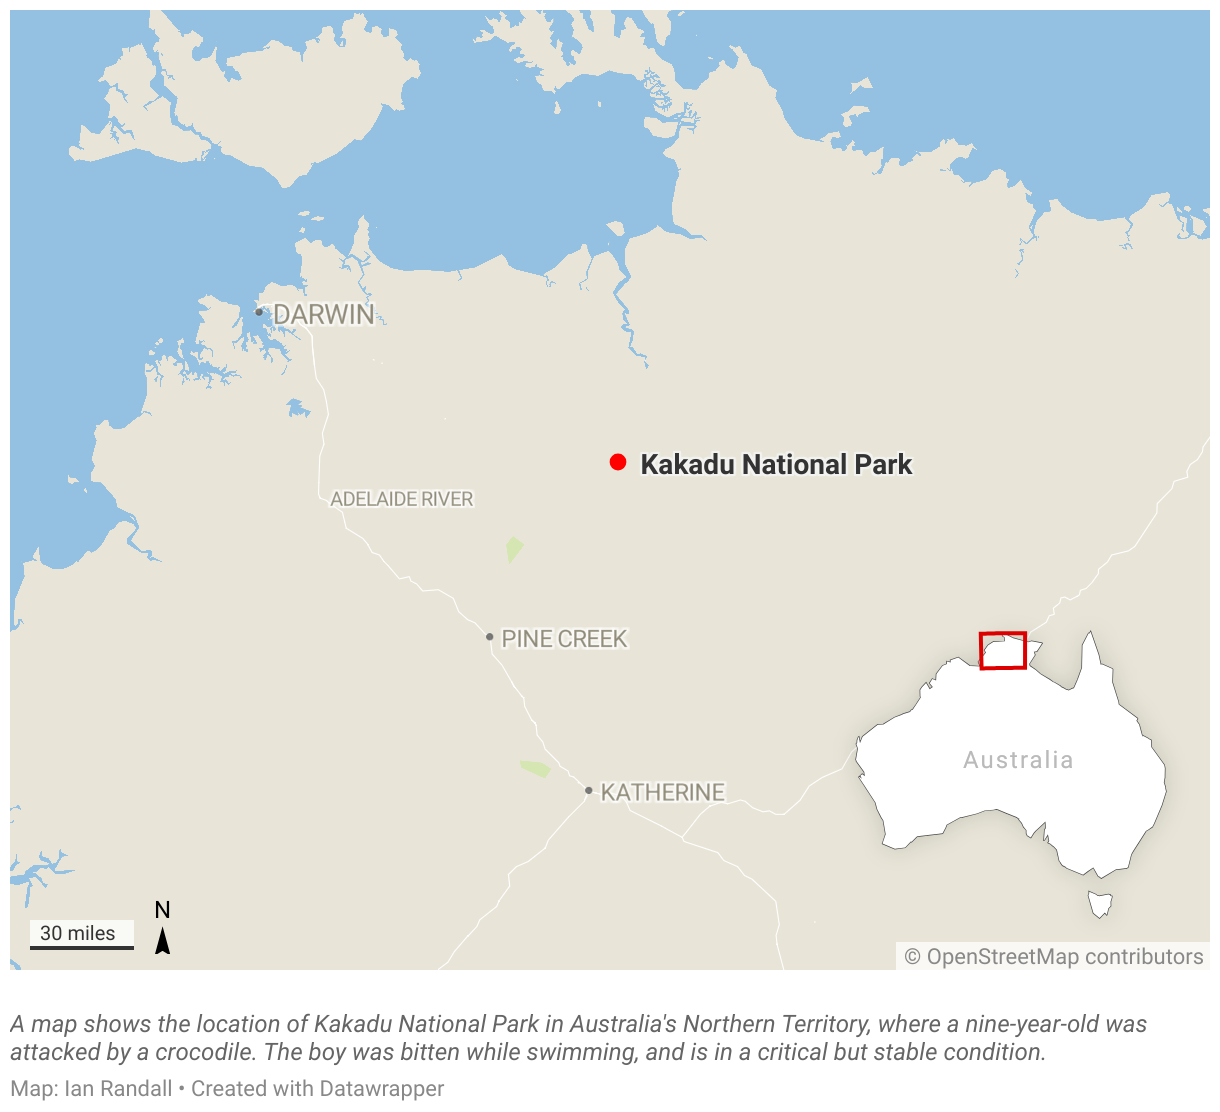 A map shows the location of Kakadu National Park in Australia's Northern Territory.